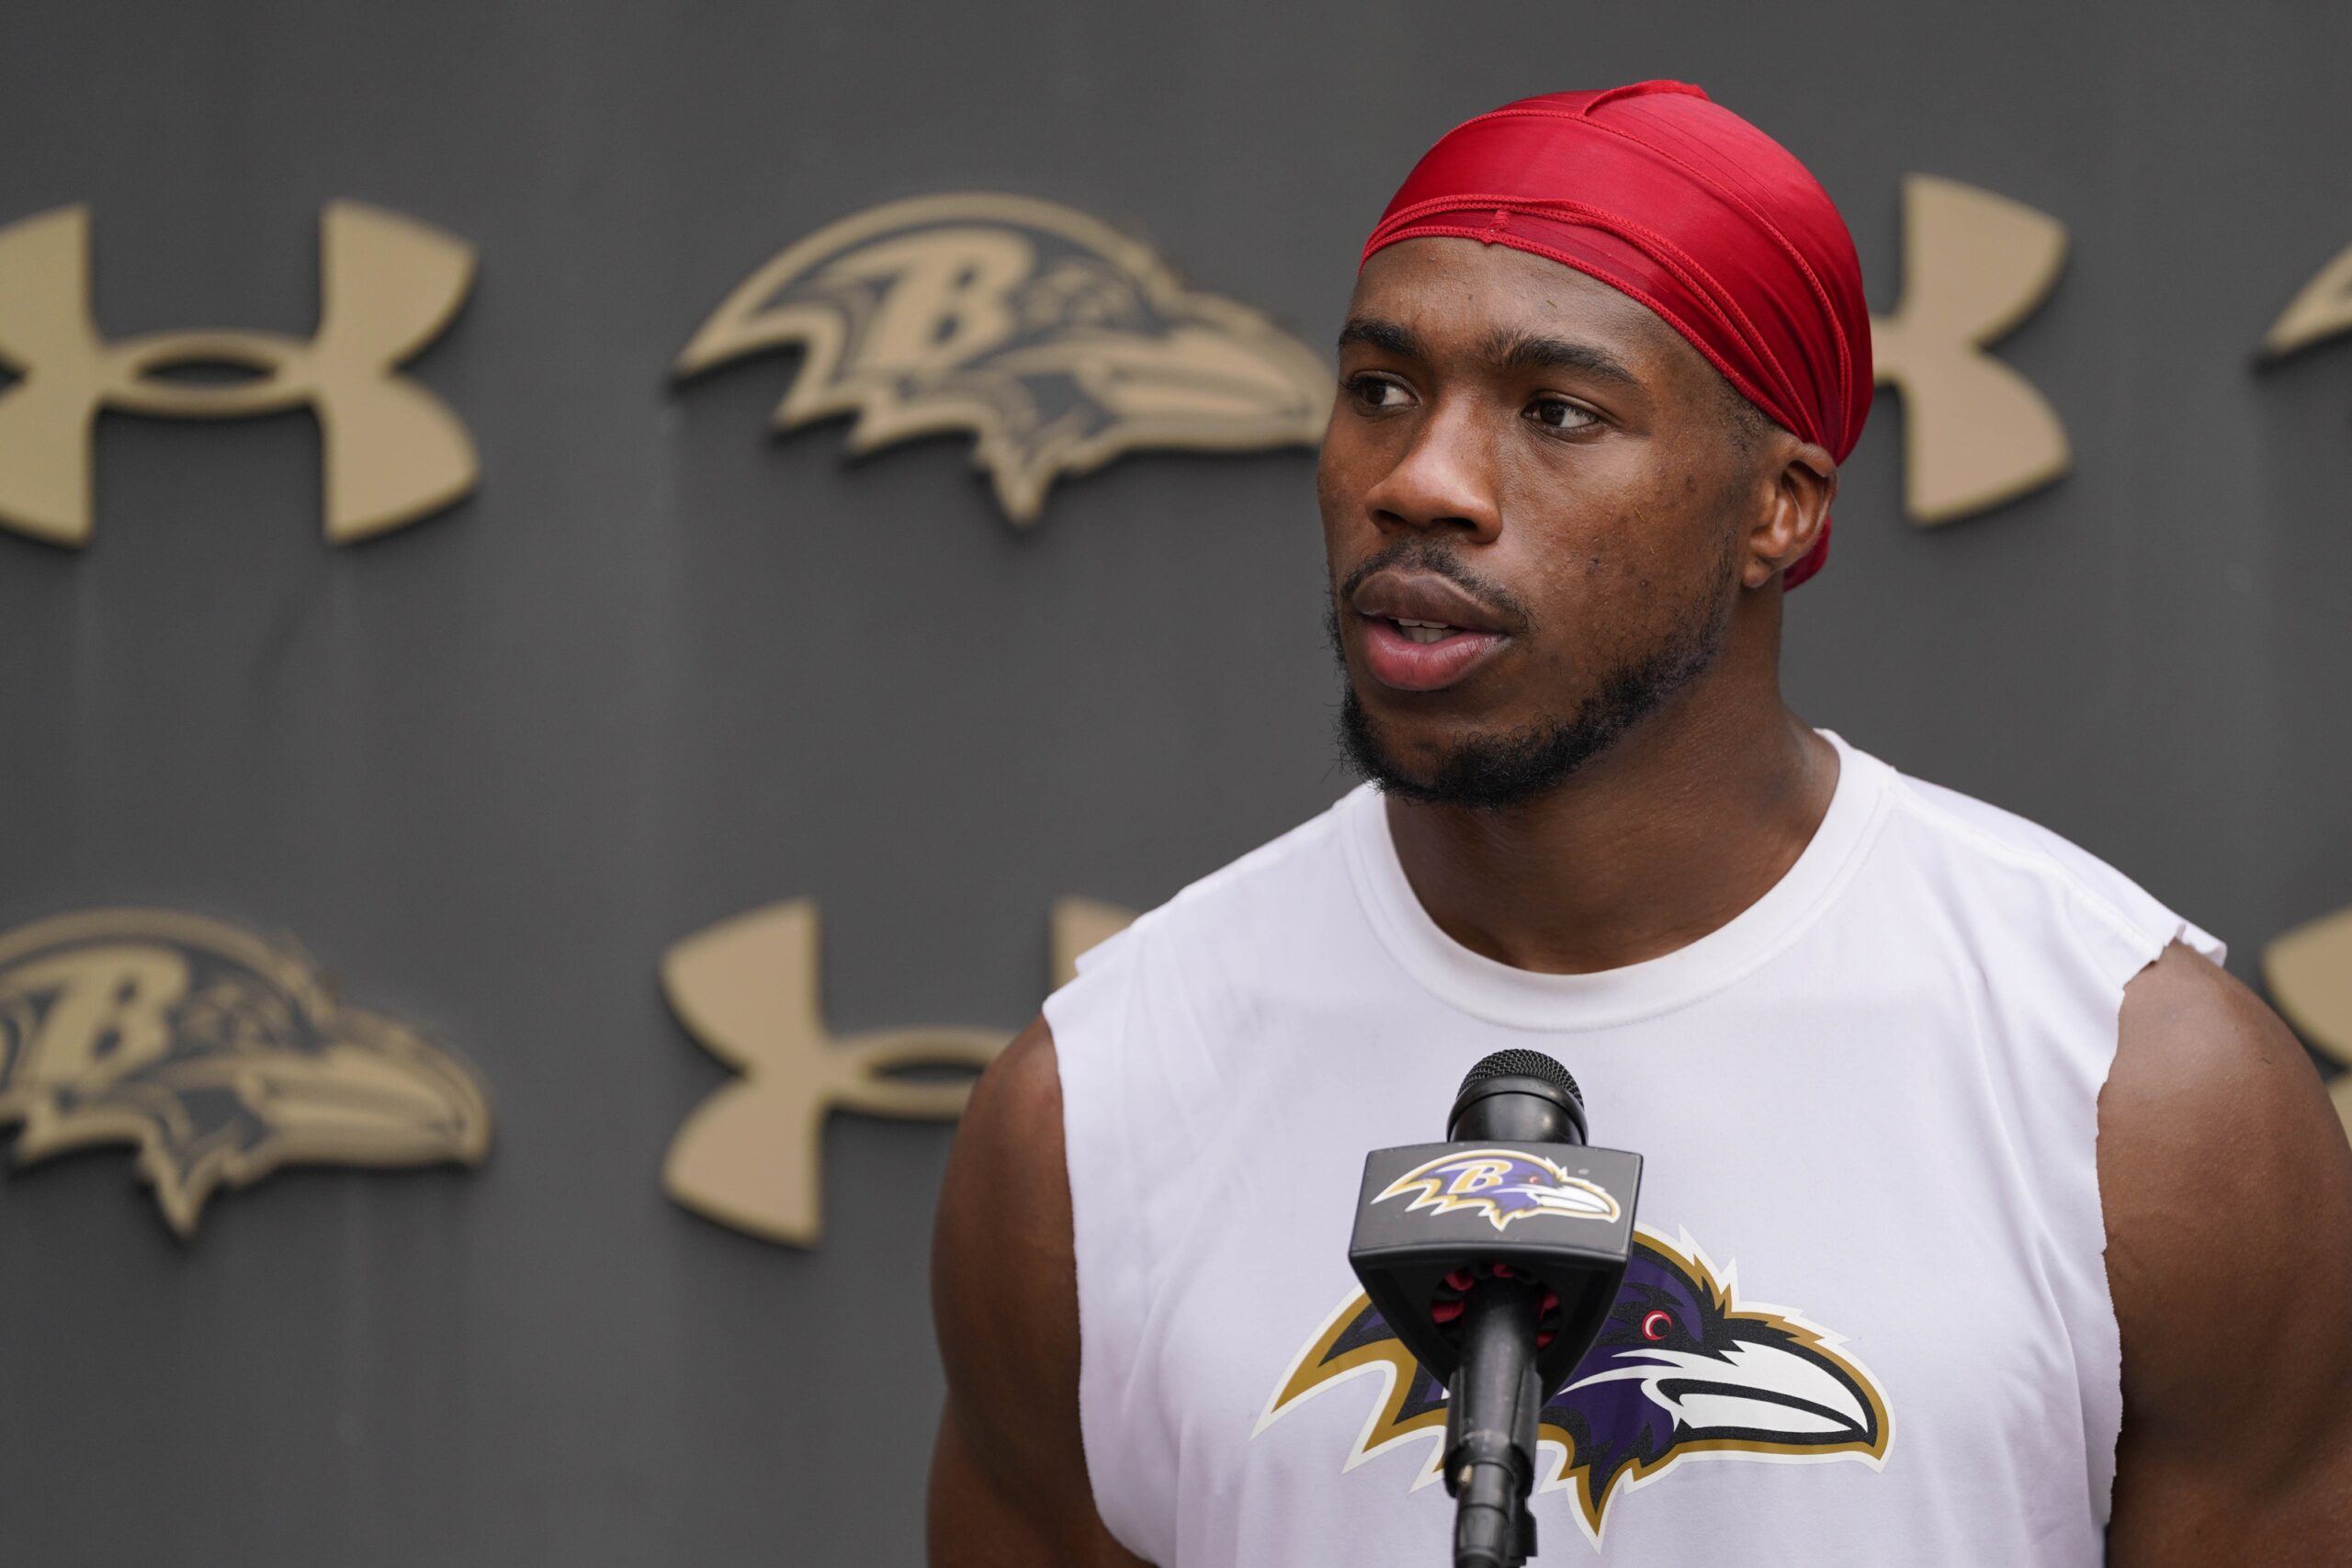 Jul 27, 2023; Owings Mills, MD, USA; Baltimore Ravens safety Marcus Williams (32) speaks to the media after training camp practice at Under Armour Performance Center. Mandatory Credit: Brent Skeen-USA TODAY Sports